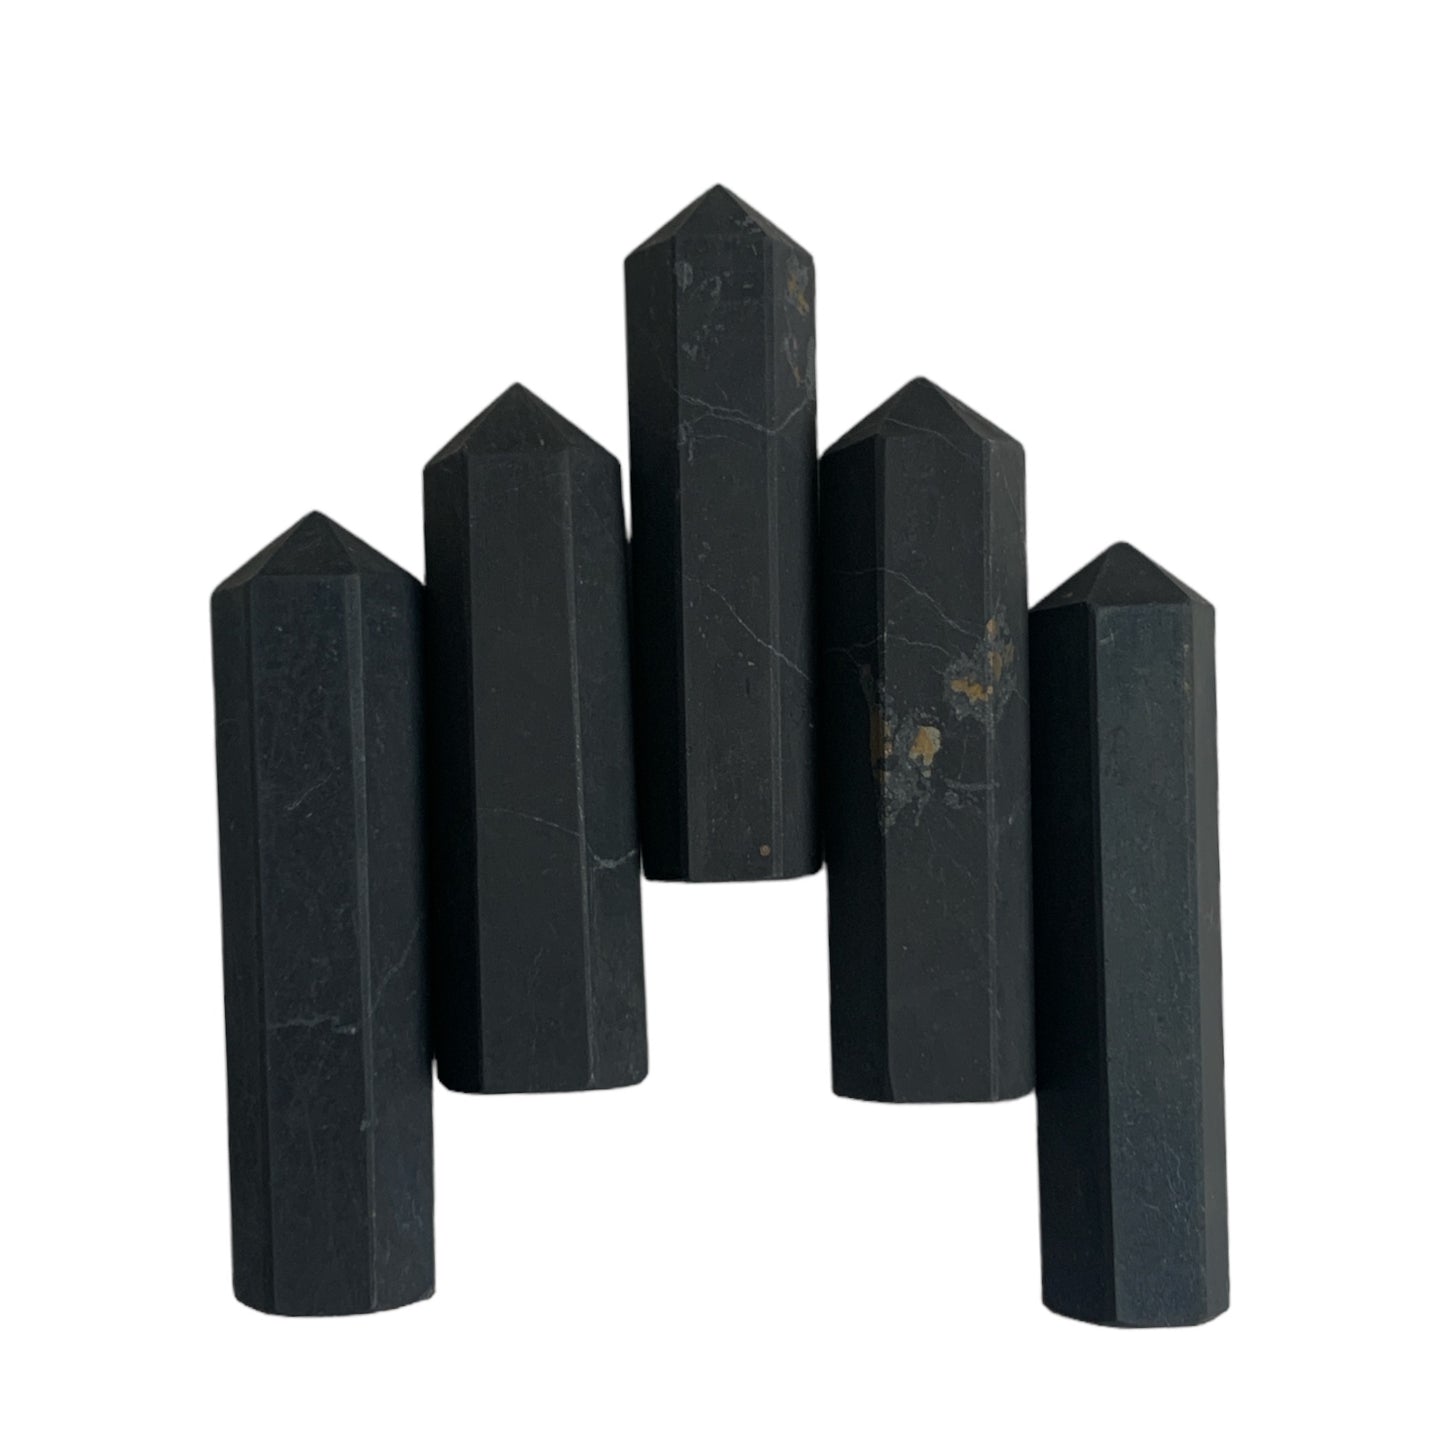 Shungite 30-35mm - Single Terminated Pencil Points - (retail purchase as singles, wholesale min order 5) - India - NEW323